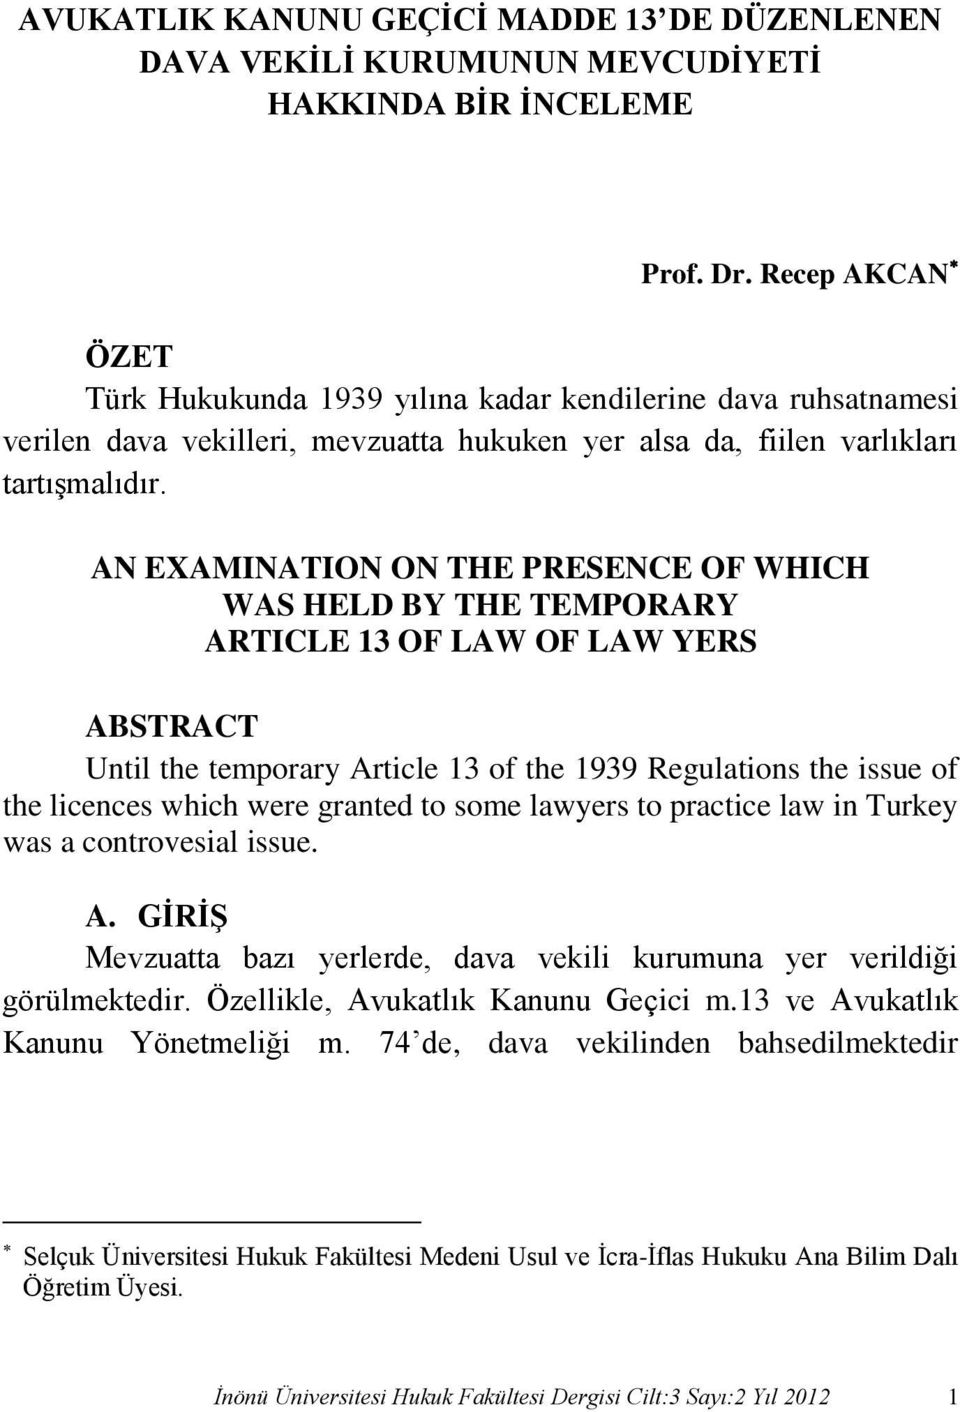 AN EXAMINATION ON THE PRESENCE OF WHICH WAS HELD BY THE TEMPORARY ARTICLE 13 OF LAW OF LAW YERS ABSTRACT Until the temporary Article 13 of the 1939 Regulations the issue of the licences which were